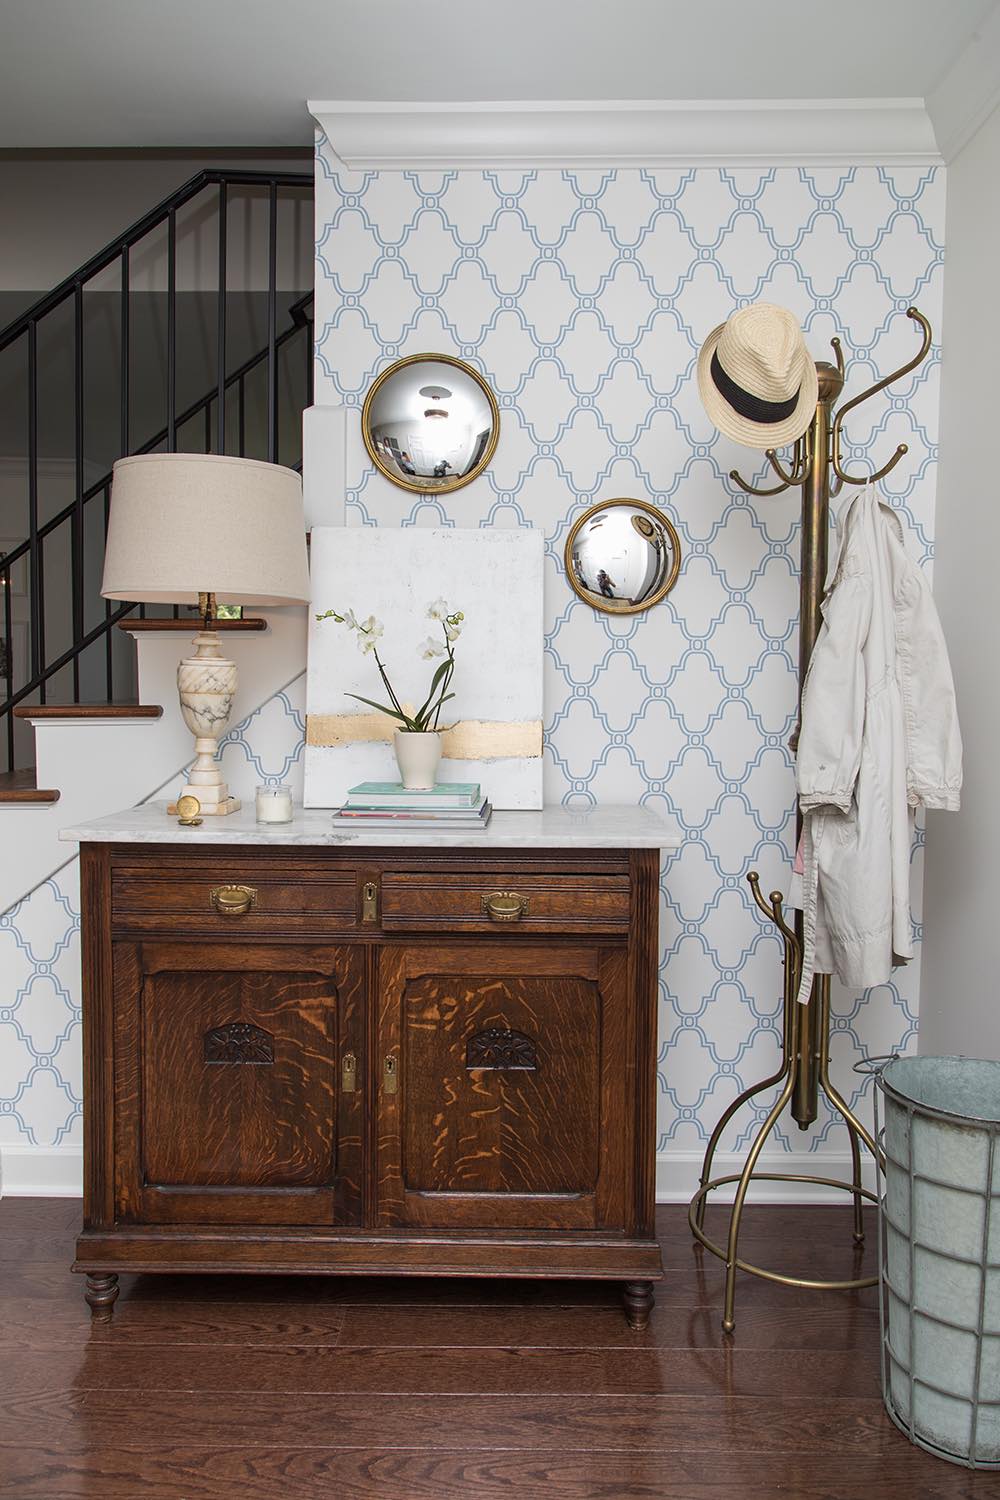 Elements of traditional decorating — the antique dresser, the brass coat rack — converge with a modern take on damask to bring sass to this space.